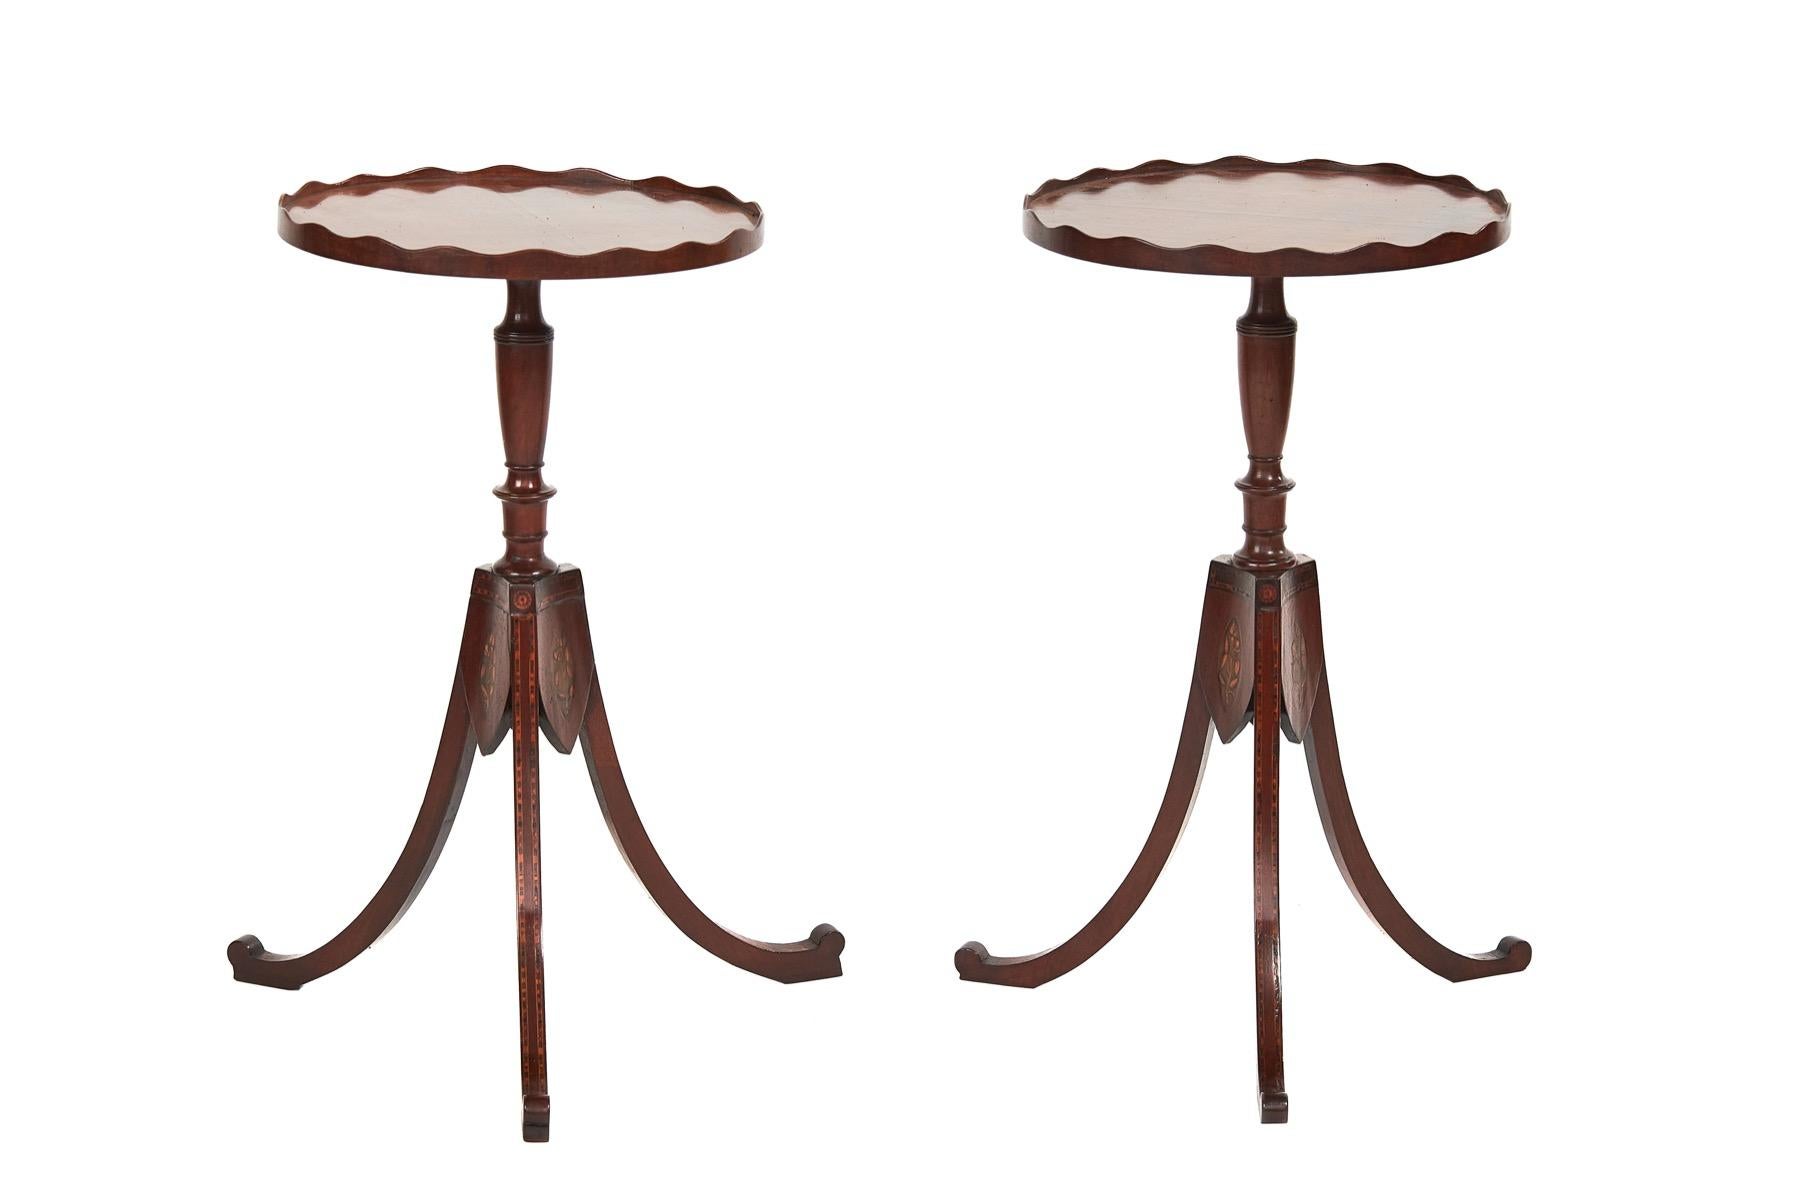 Pair Regency Mahogany inlaid Lamp Tables
Each With:
Circular tops with Pie crust shaped gallery edge,Diameter:35cm
Turned Column,
Base With 3 Shields with Oval inlay, Between Tripod shaped Splay legs,
With Chequer Banding inlay on